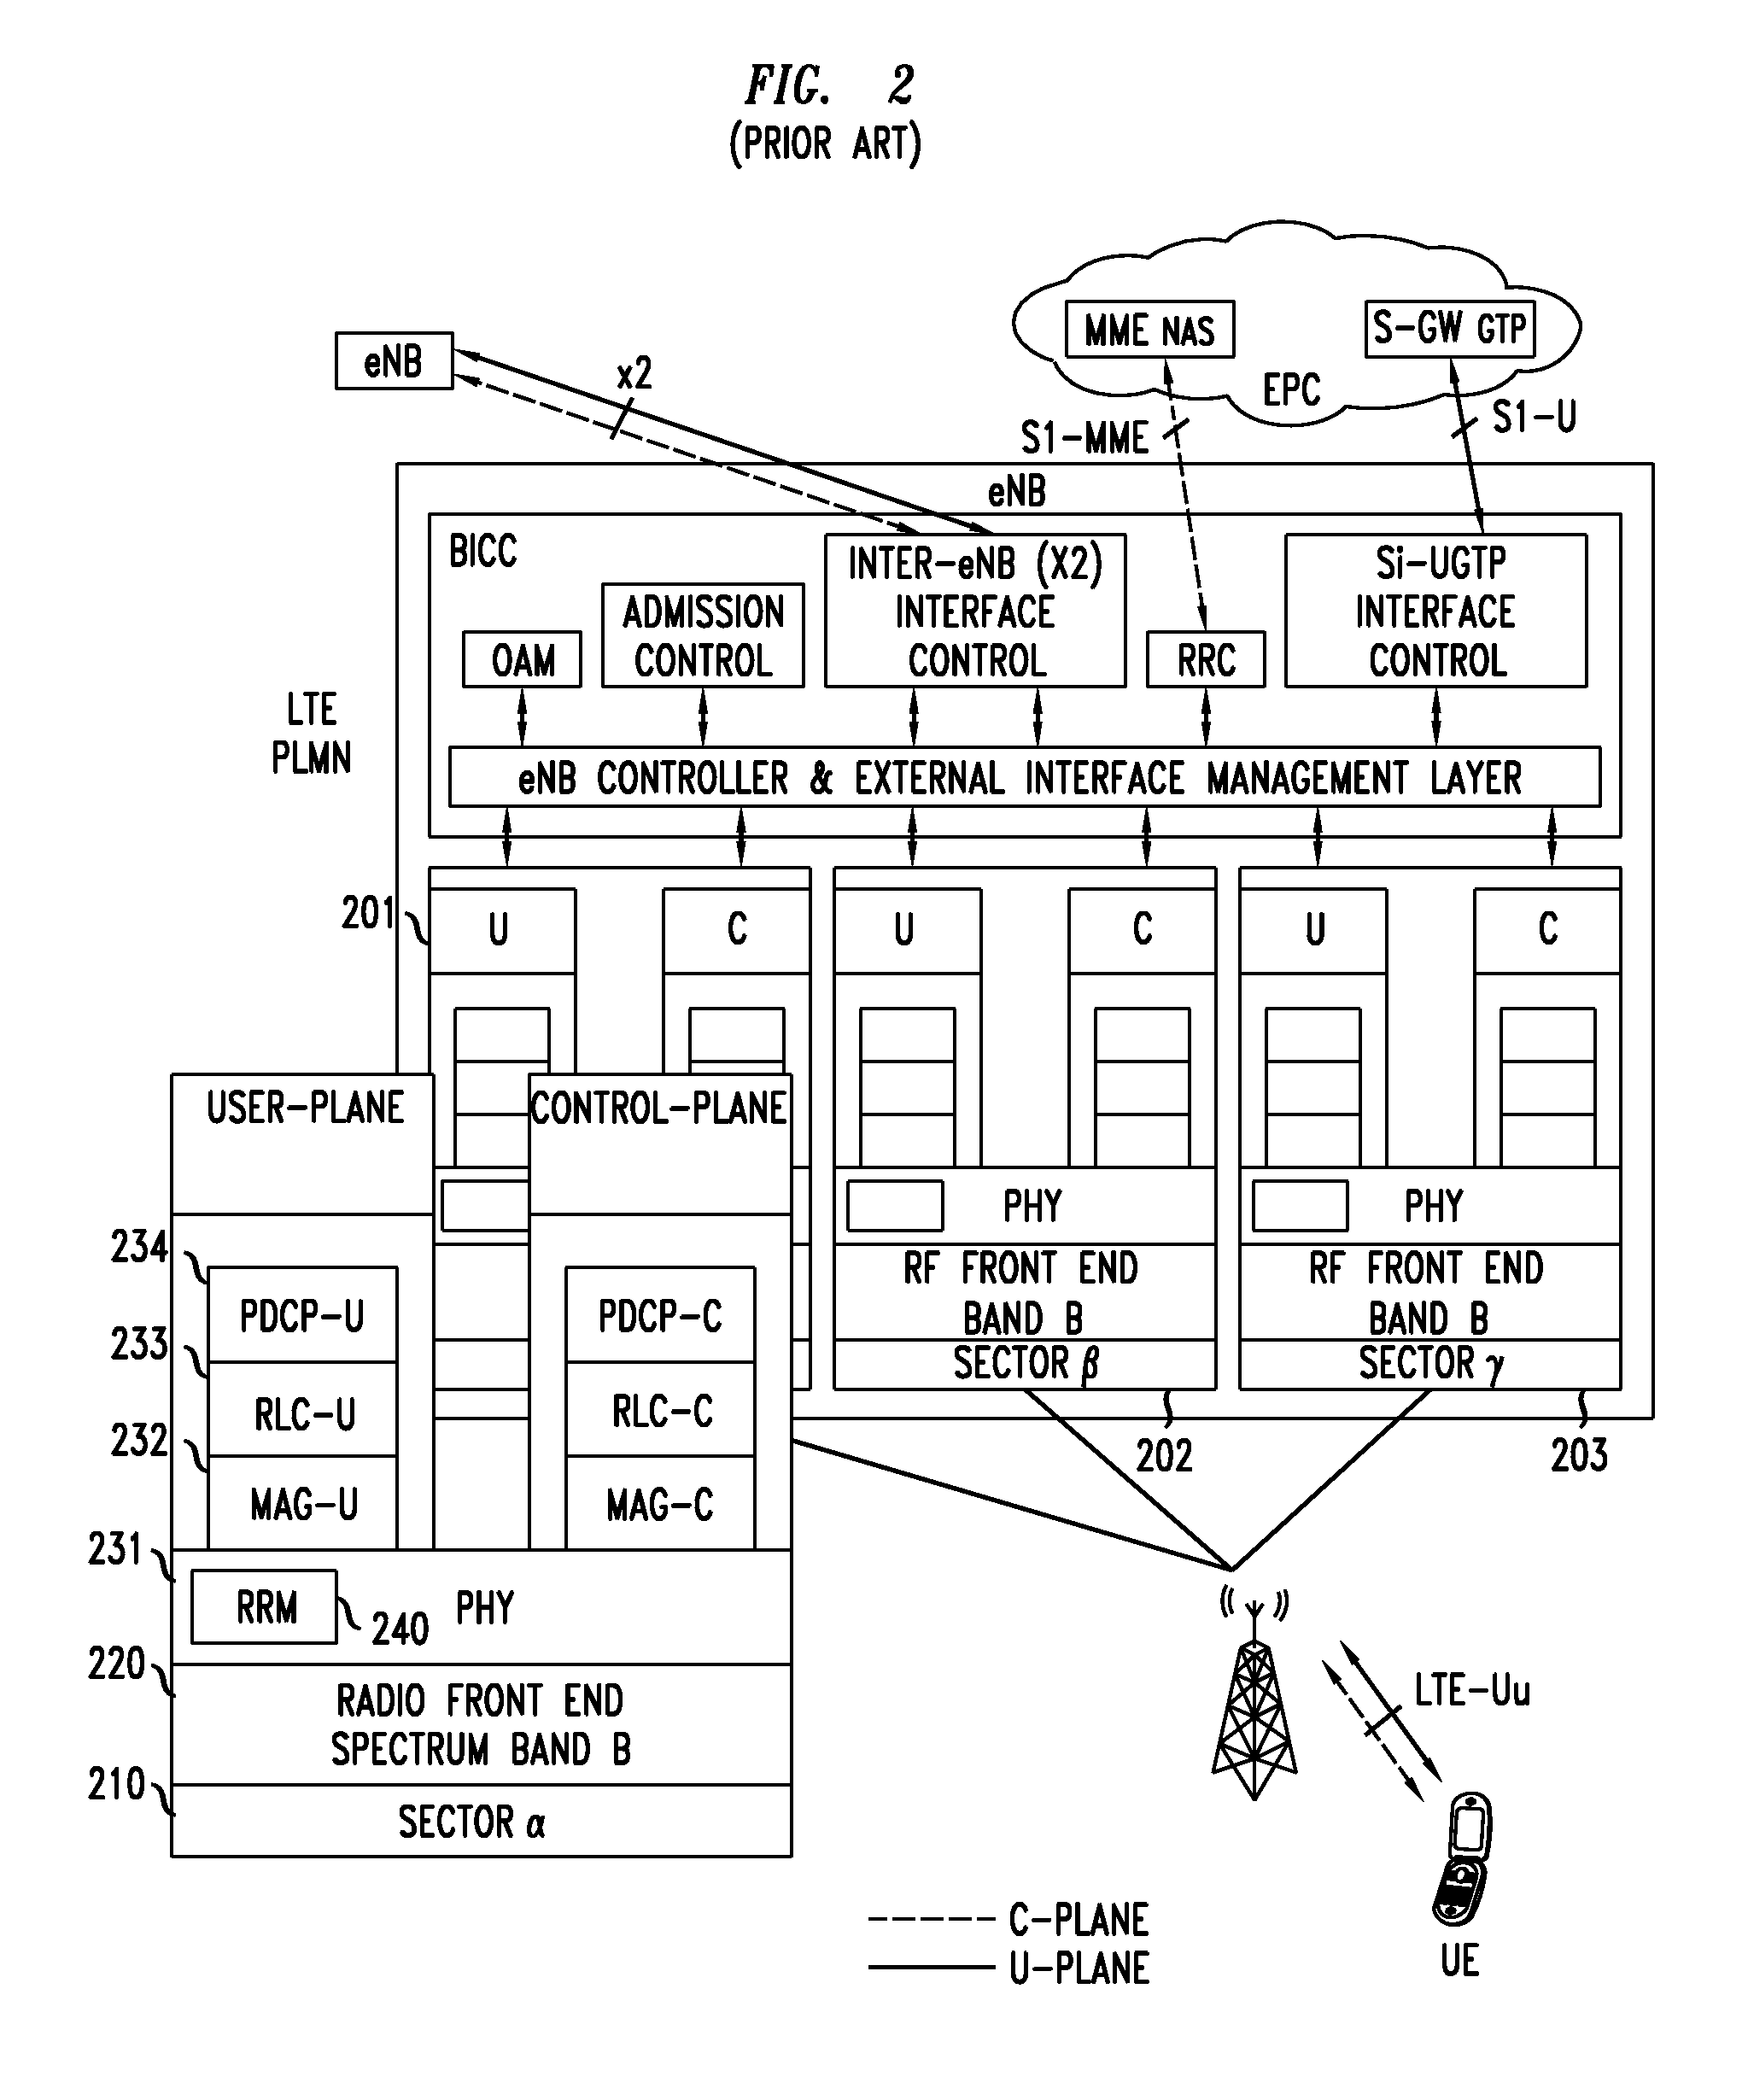 Method And Apparatus Of Virtualized Resource Sharing In Cellular Networks